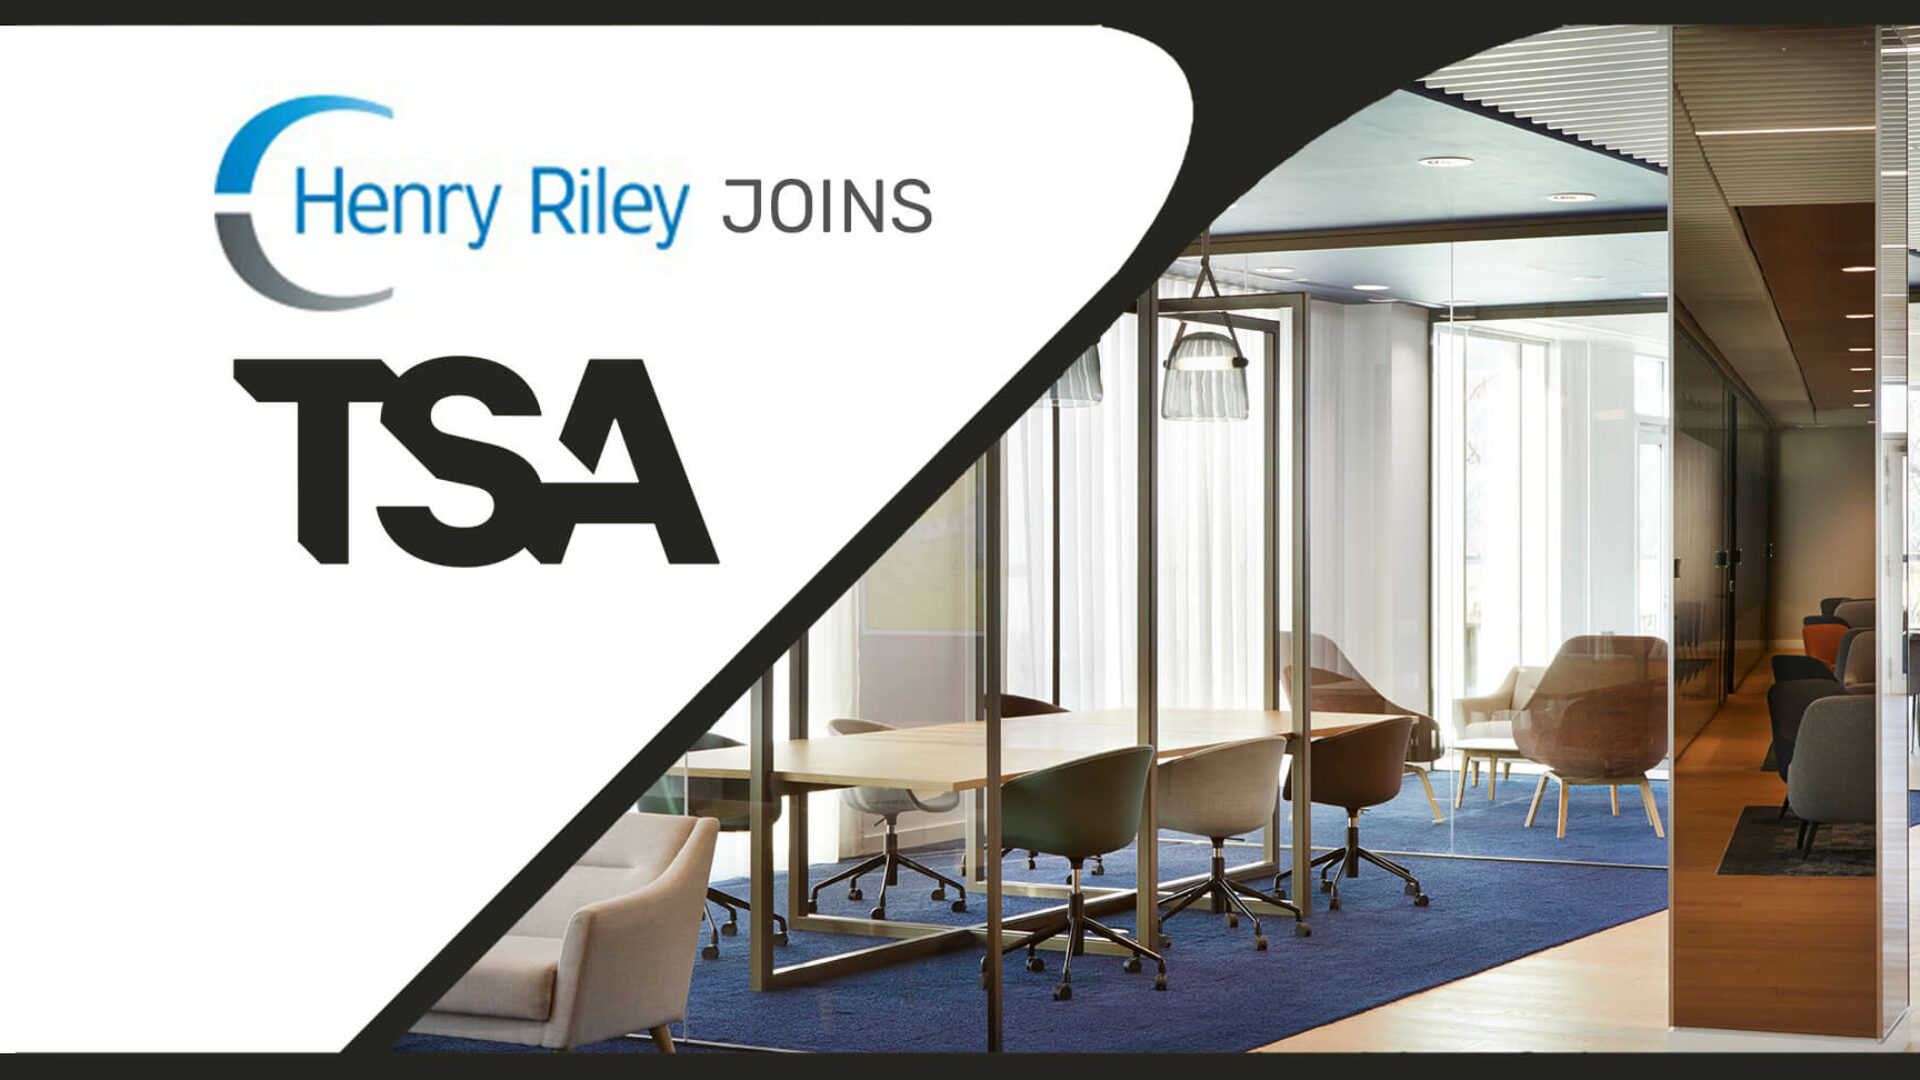 TSA Management expands into the United Kingdom with key acquisition